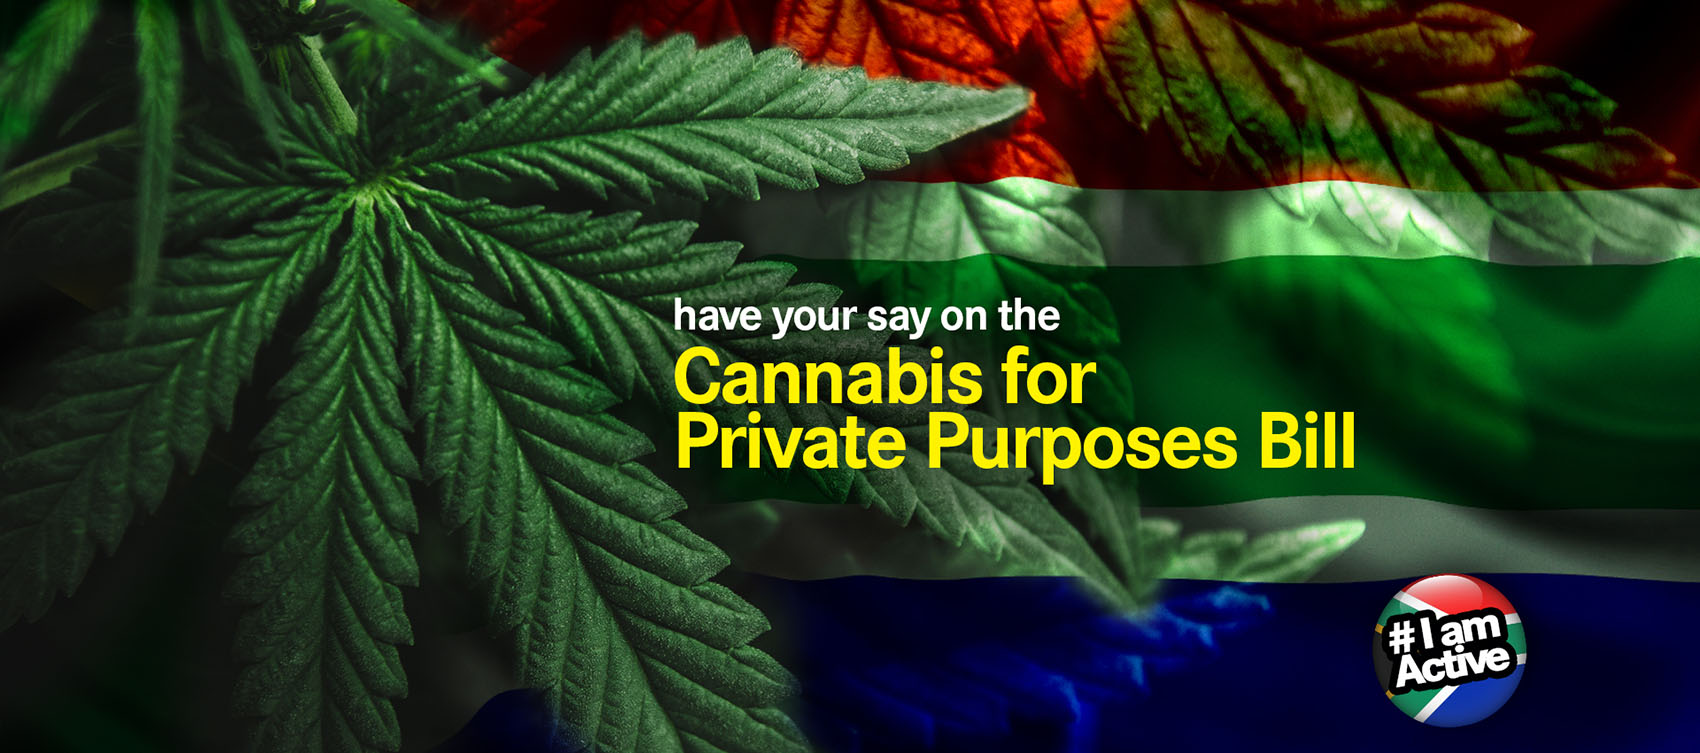 have your say on Cannabis for Private Purposes Bill DearSA Cannabis for private purposes